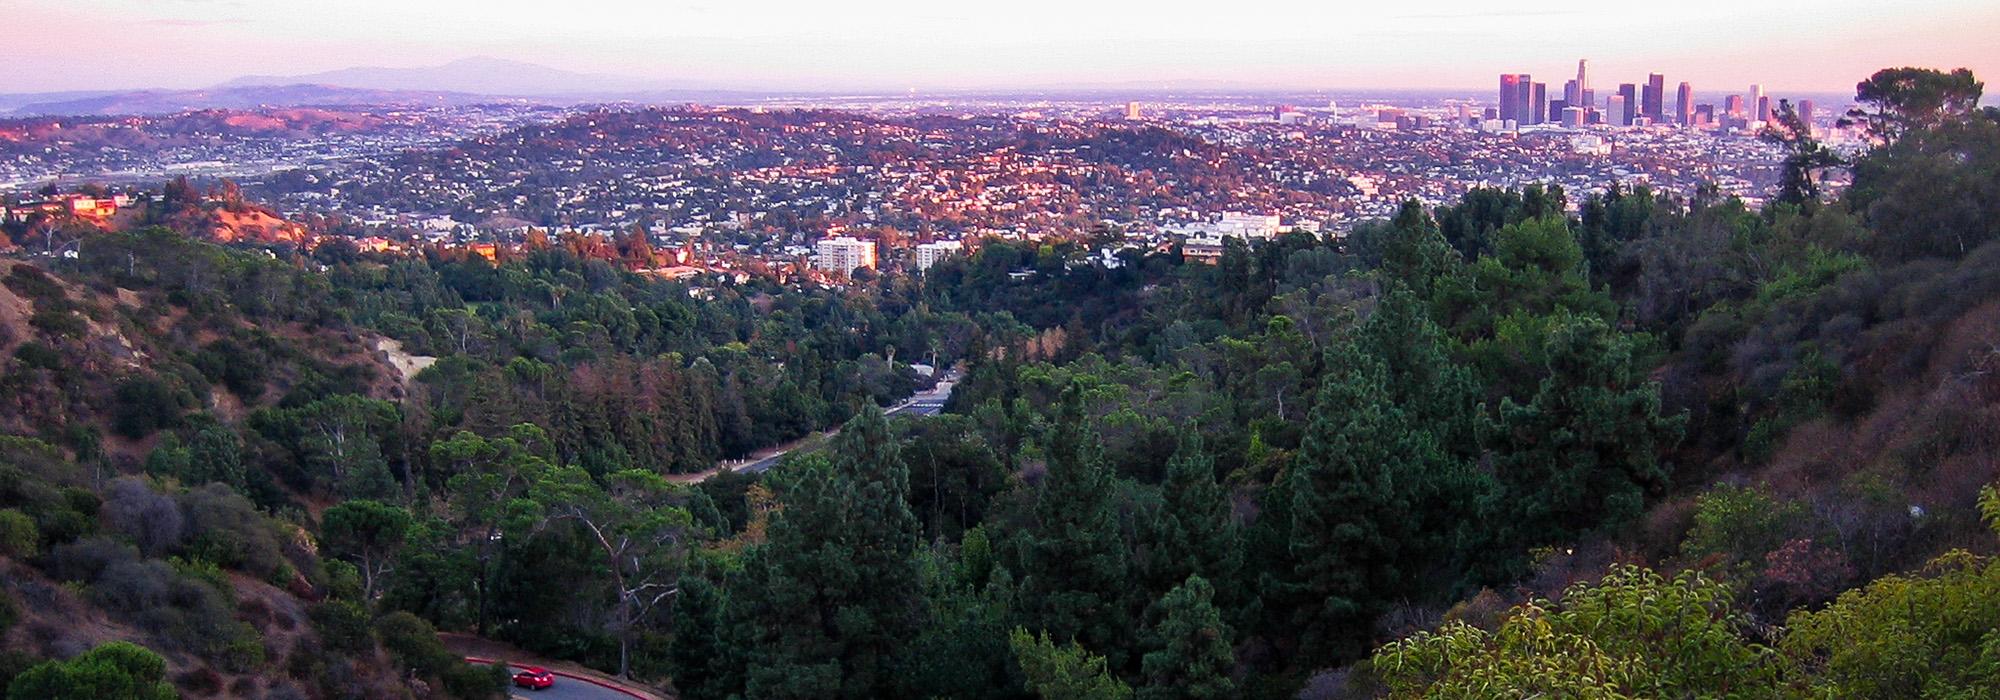 Griffith Park, Los Angeles, CA